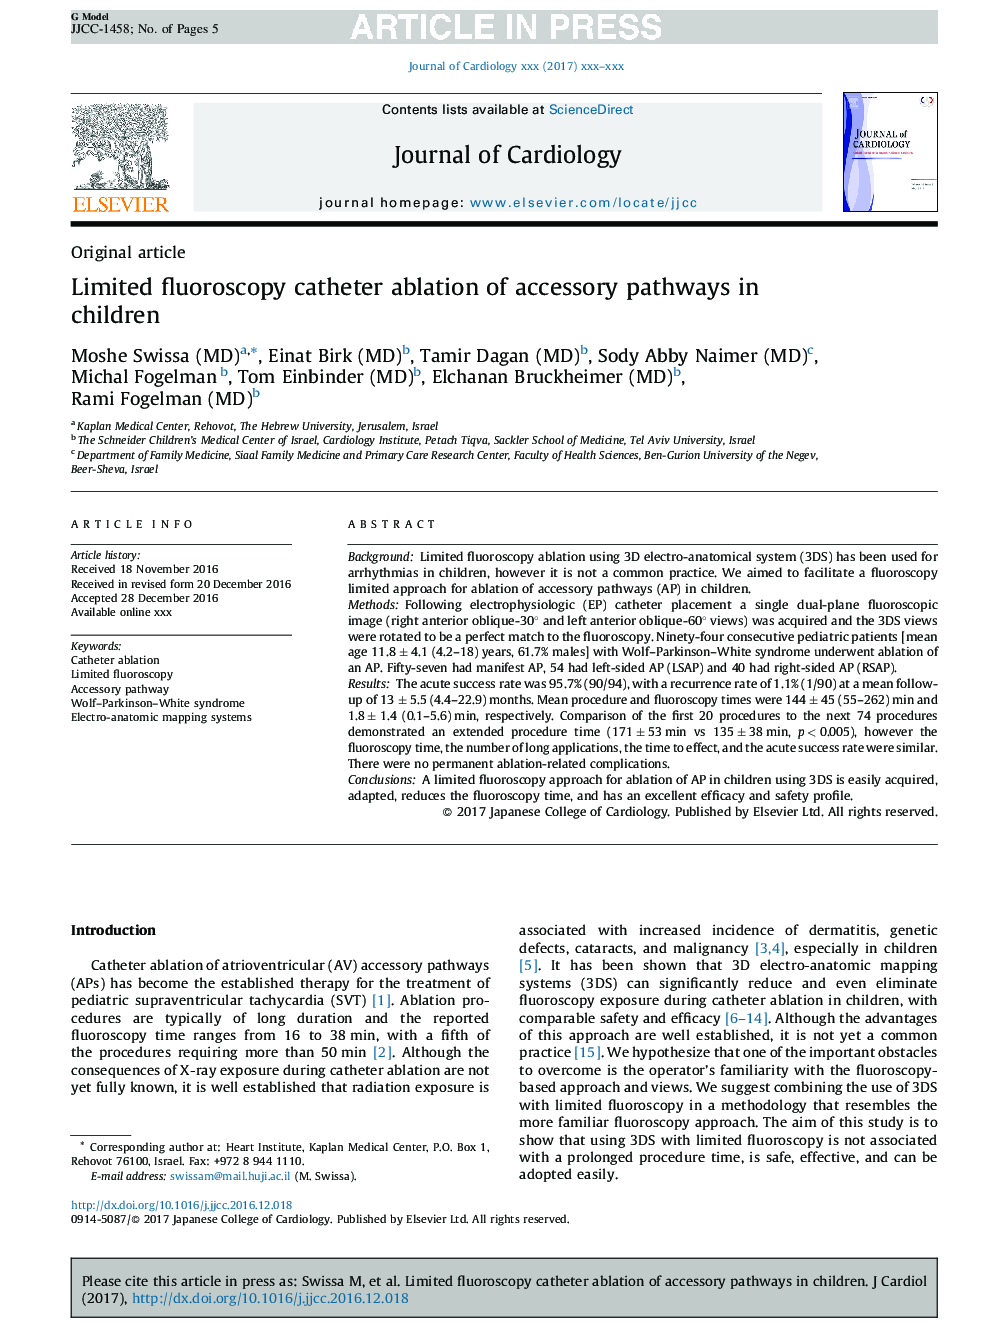 Limited fluoroscopy catheter ablation of accessory pathways in children